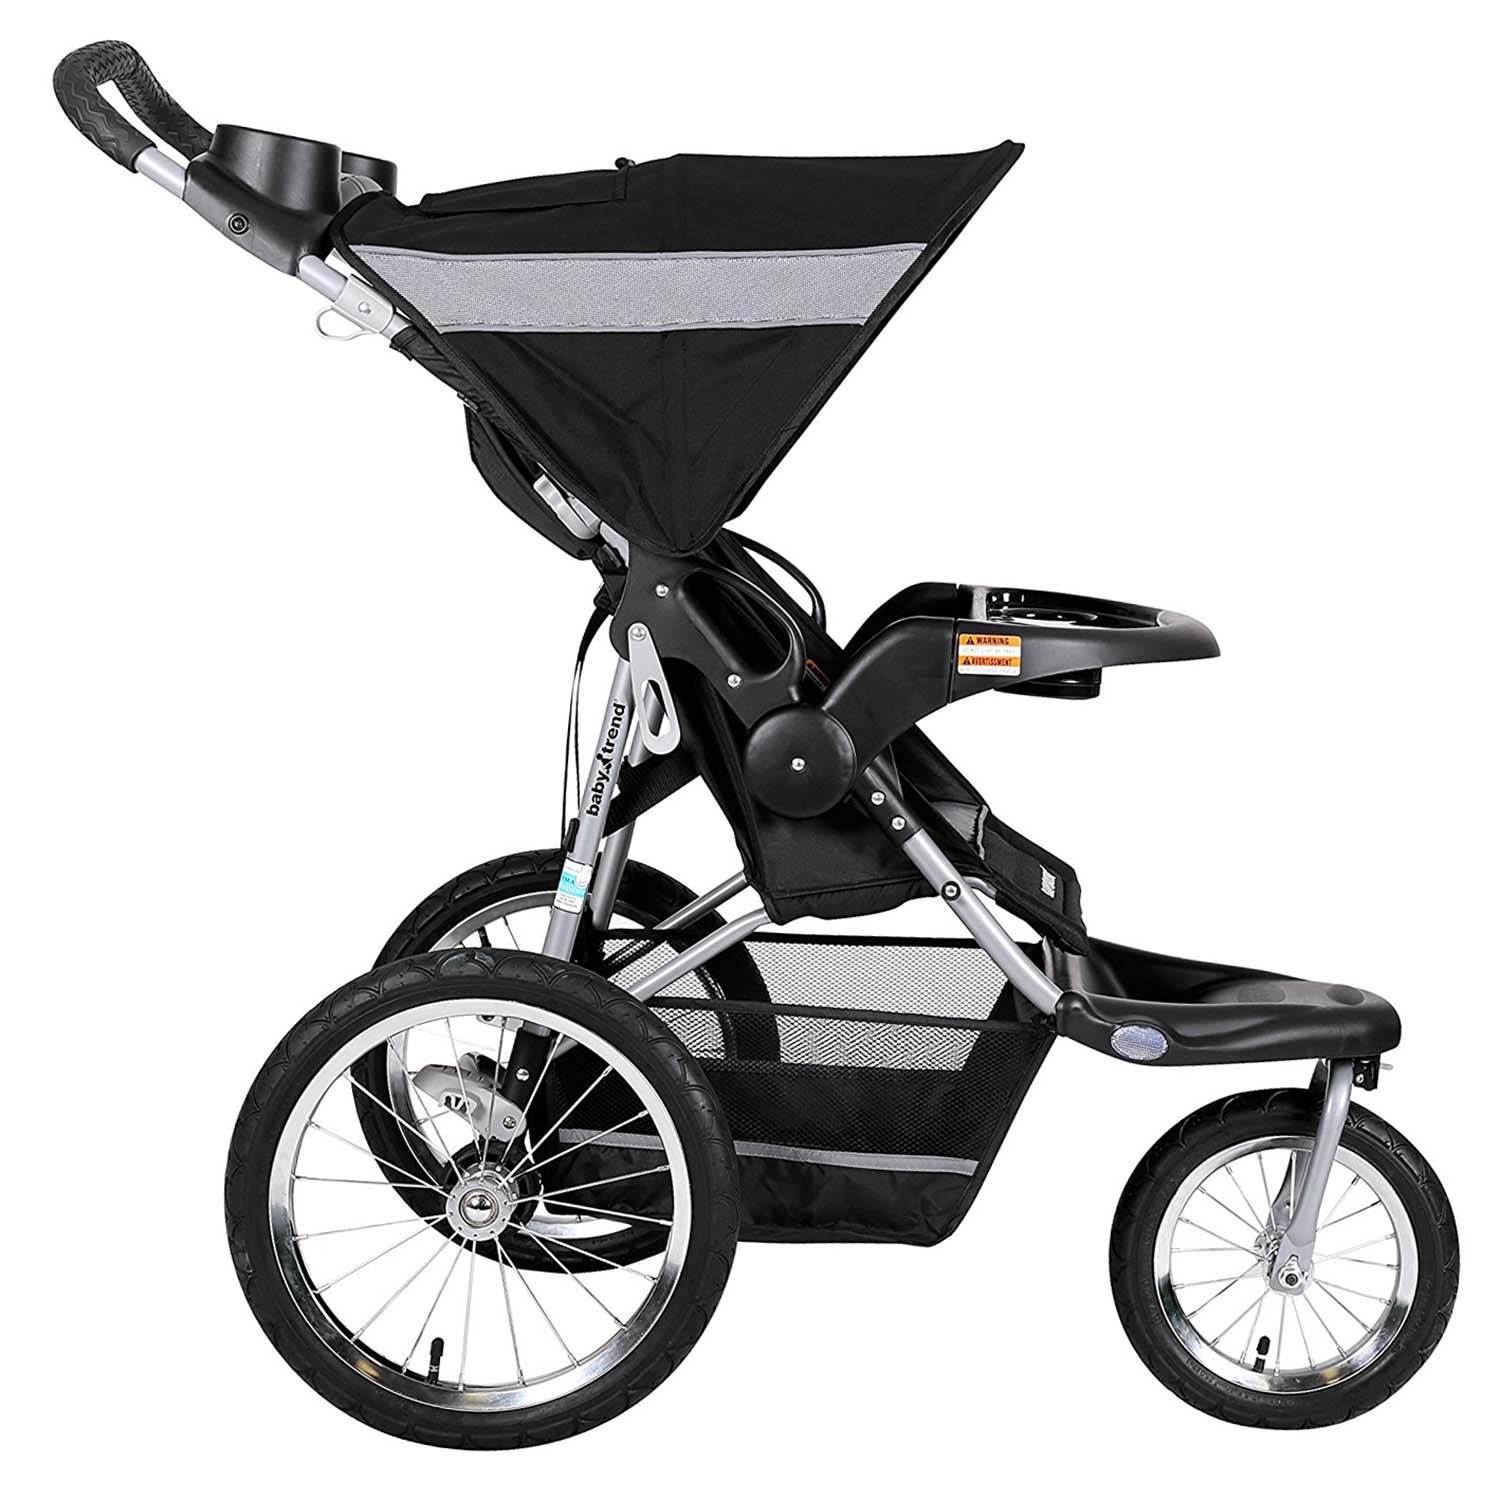 Baby Trend Expedition Travel System Stroller, Millennium White - image 5 of 7